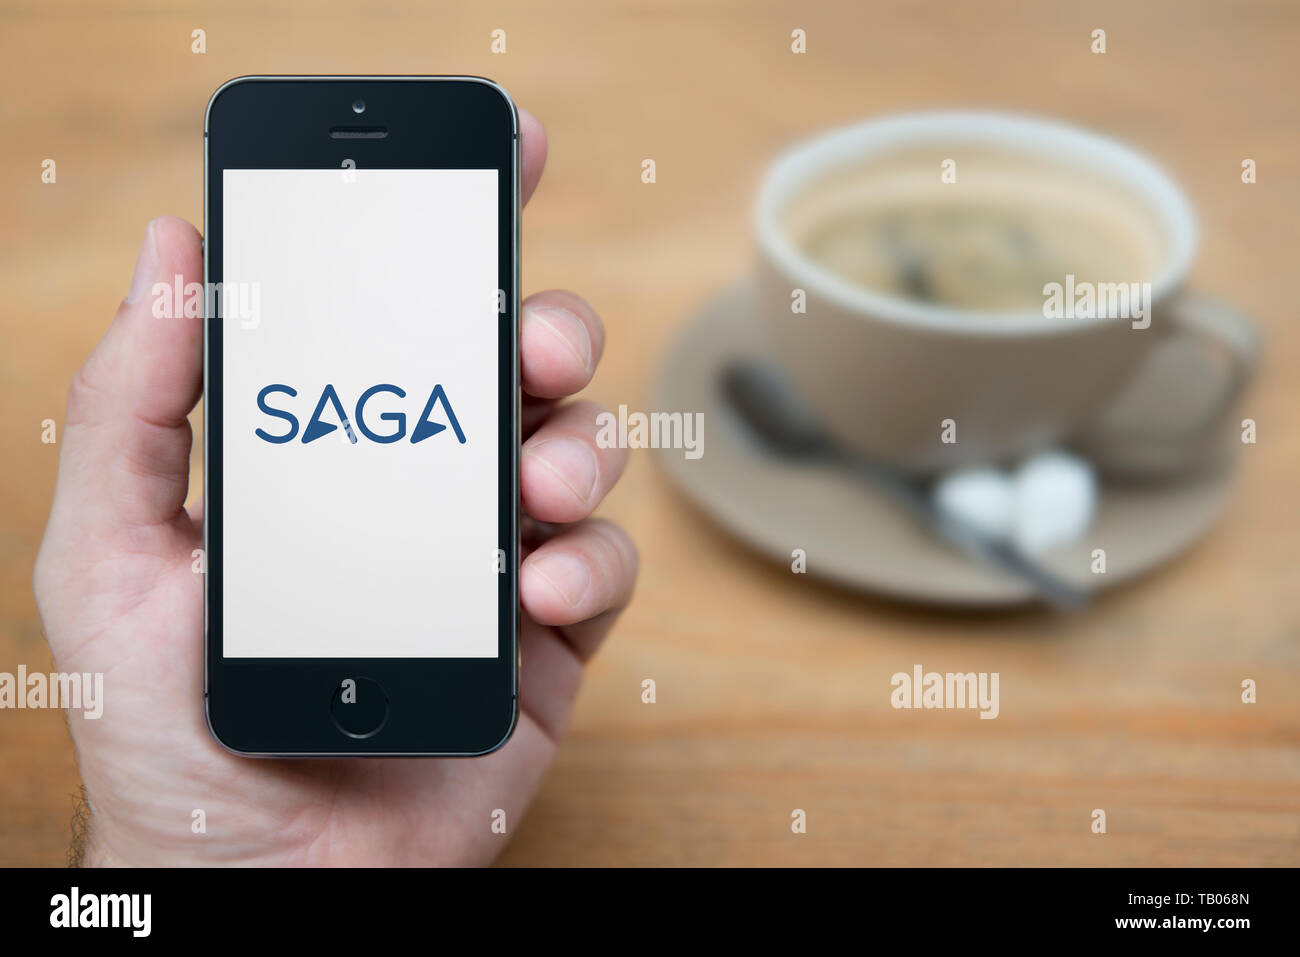 A man looks at his iPhone which displays the Saga logo (Editorial use only). Stock Photo